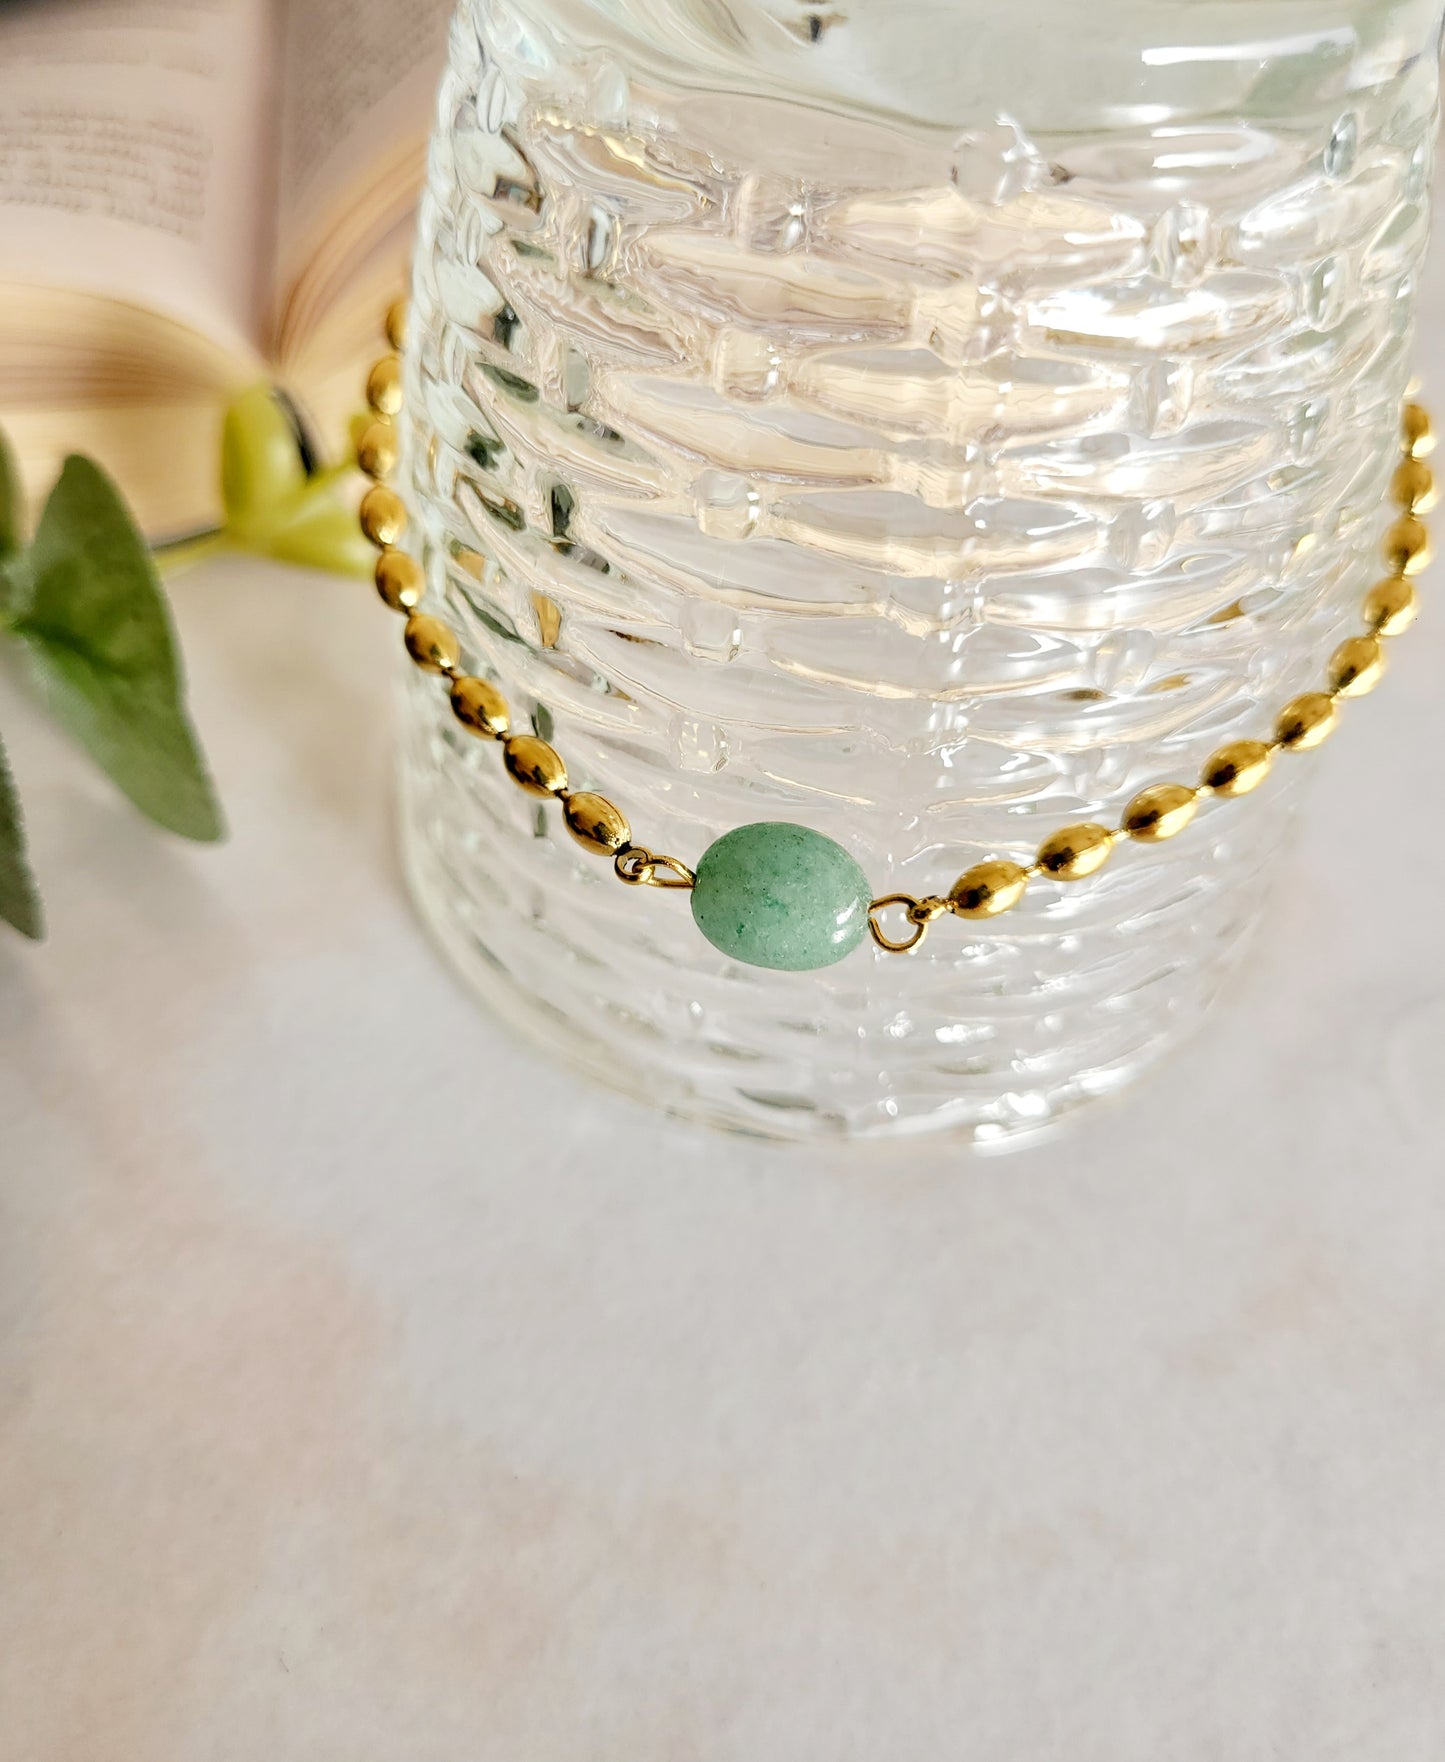 Natural Stone Bracelet - Green Stone / Stainless Steel / Natural Stone